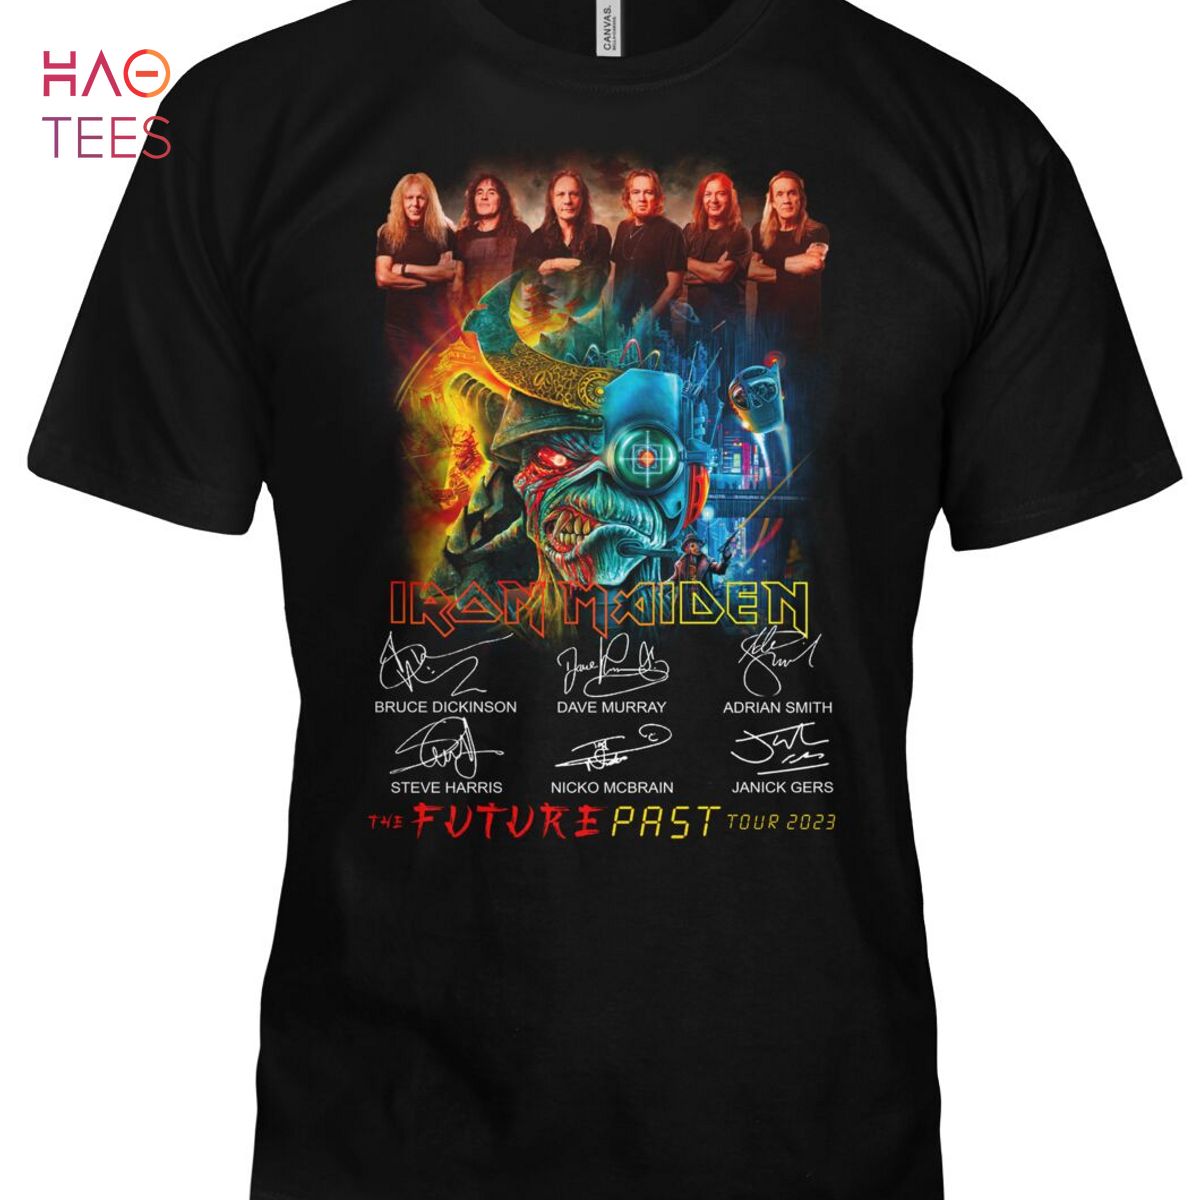 HOT Ironmaiden Shirt Limited Edition